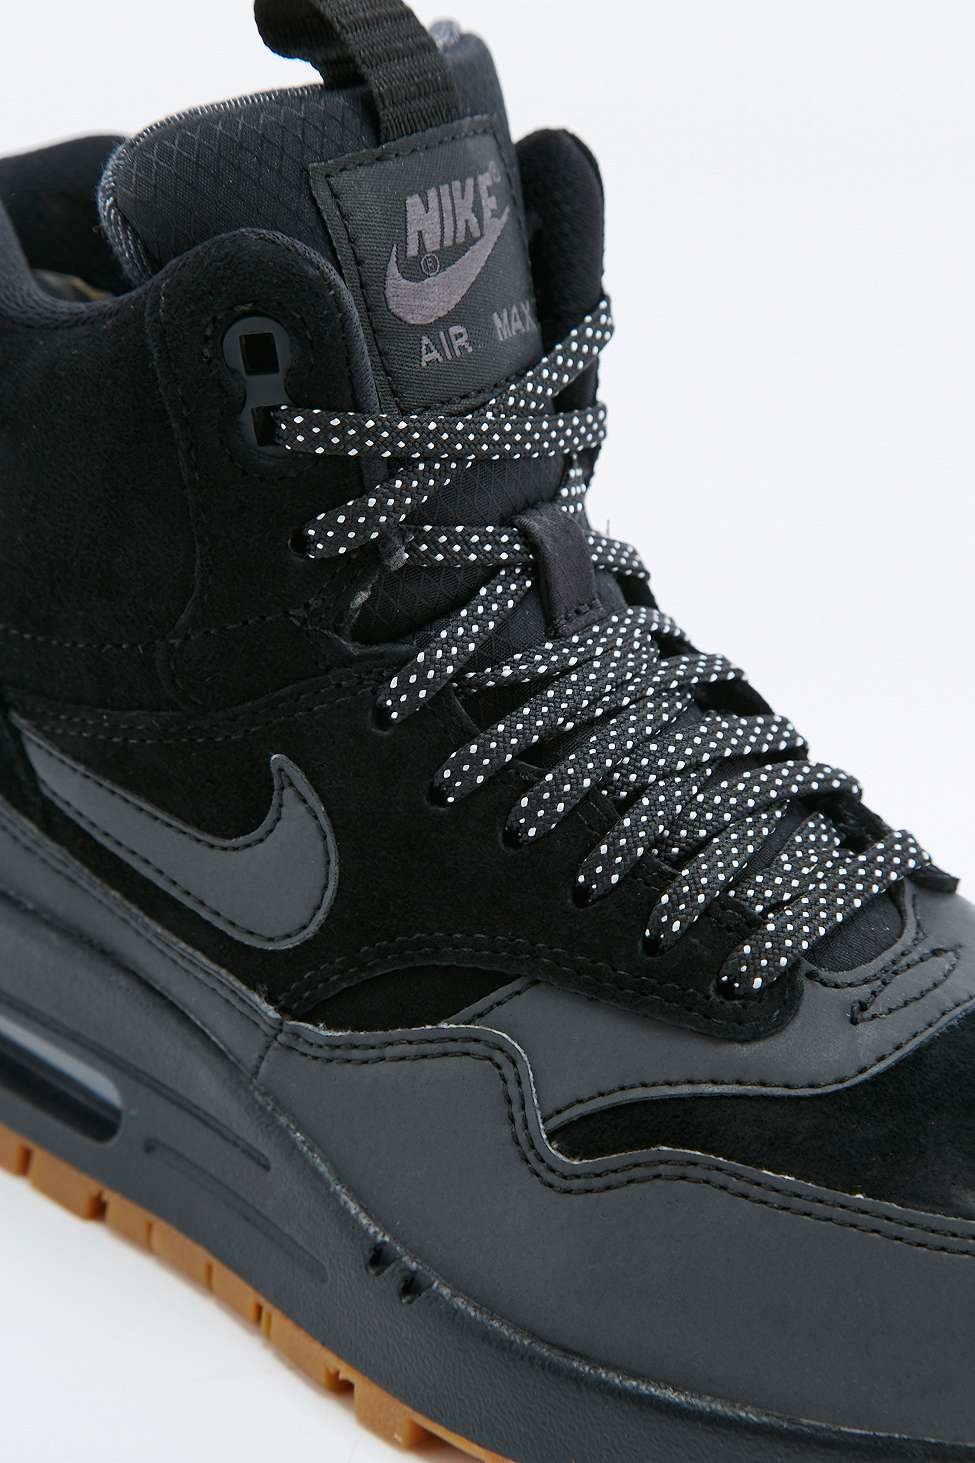 mens nike trainer boots